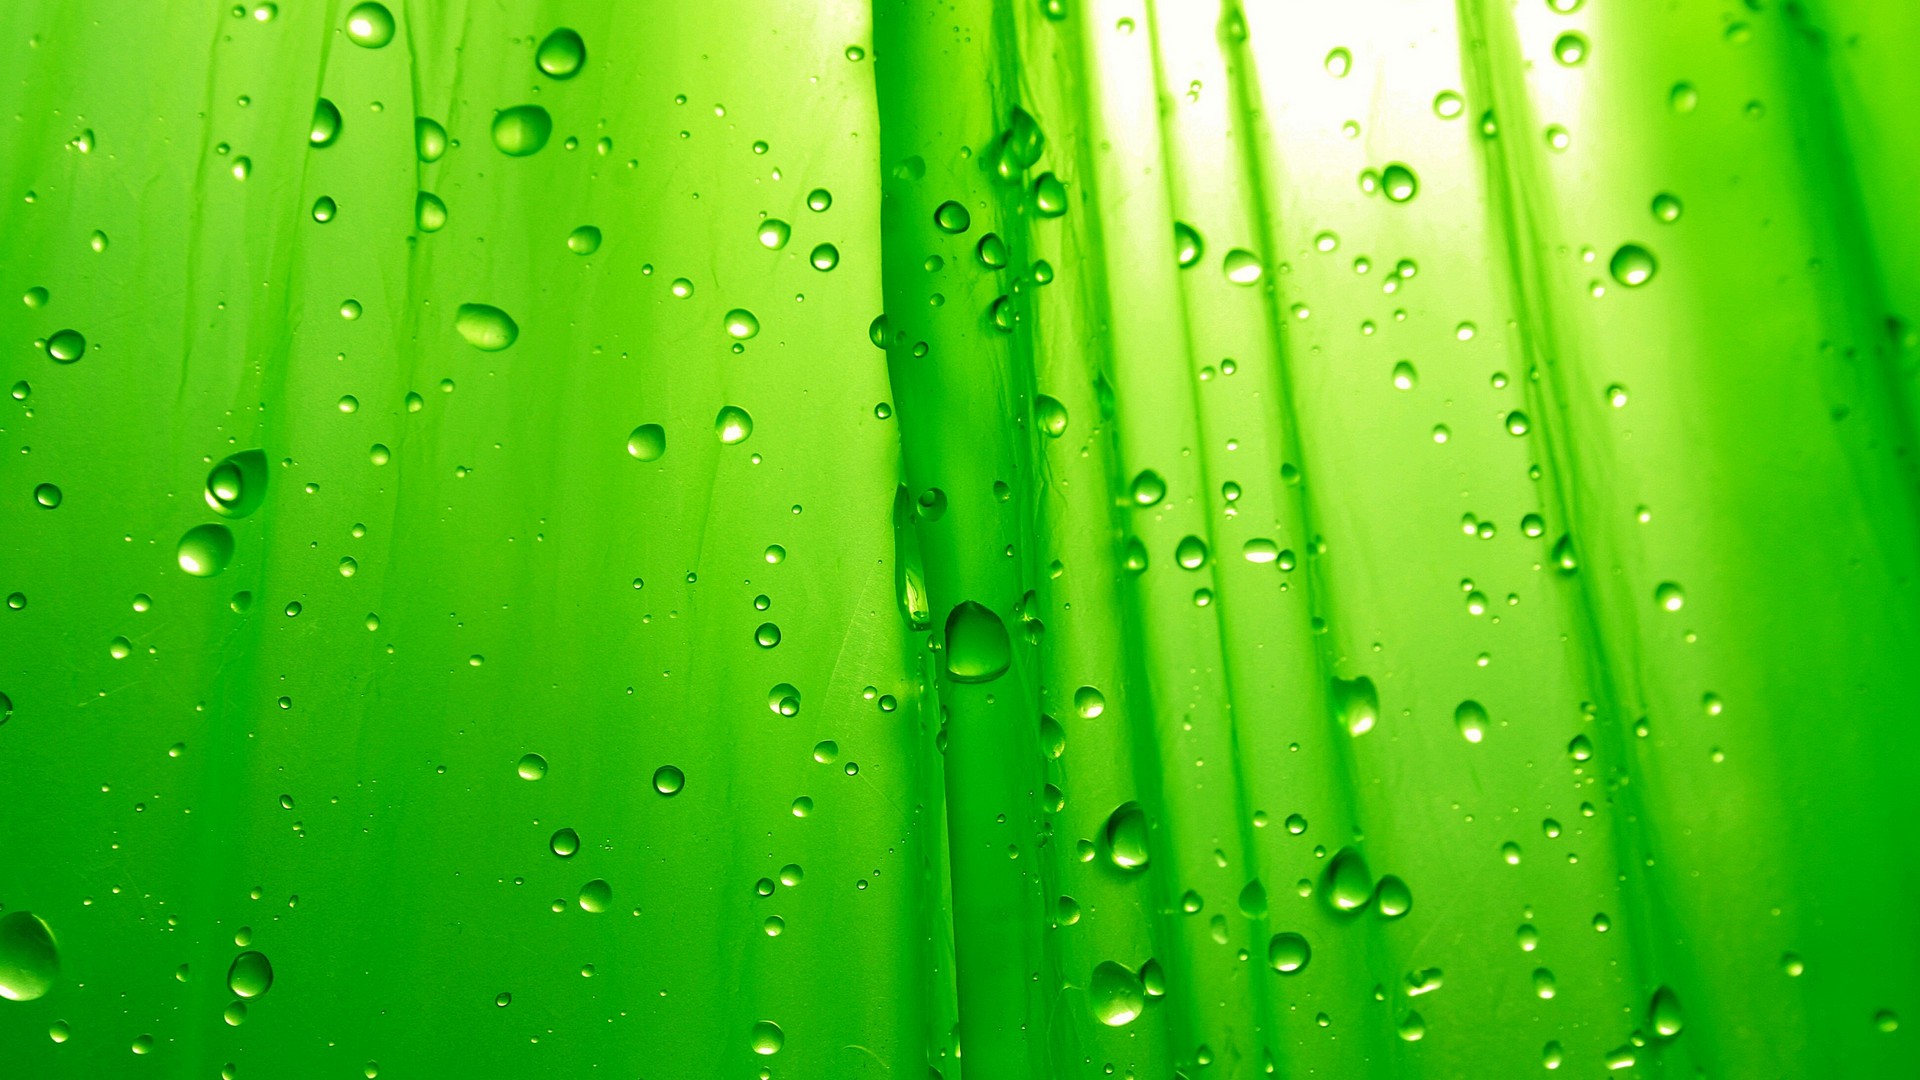 HD Wallpaper Light Green with image resolution 1920x1080 pixel. You can make this wallpaper for your Desktop Computer Backgrounds, Mac Wallpapers, Android Lock screen or iPhone Screensavers